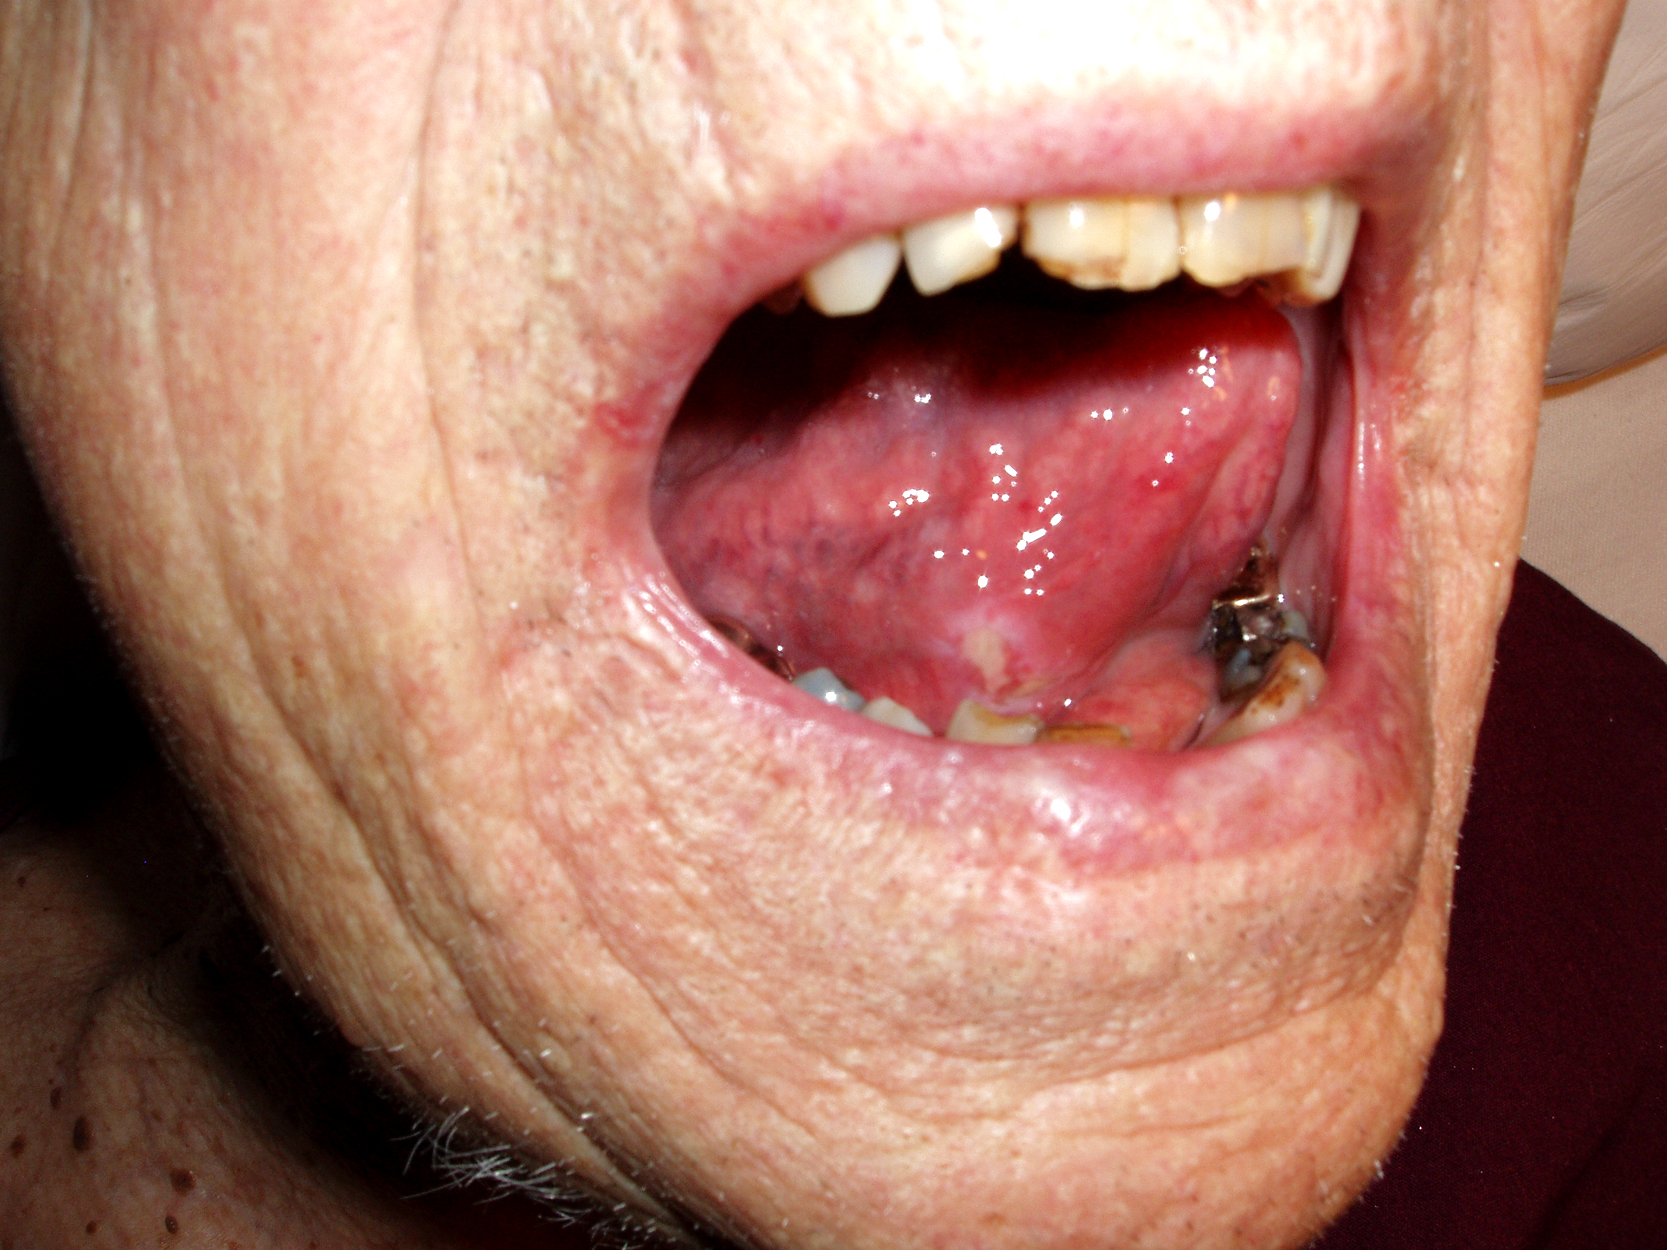 Squamous Cell Cancer, Base of Tongue: Note white area with swelling, right base of tongue.